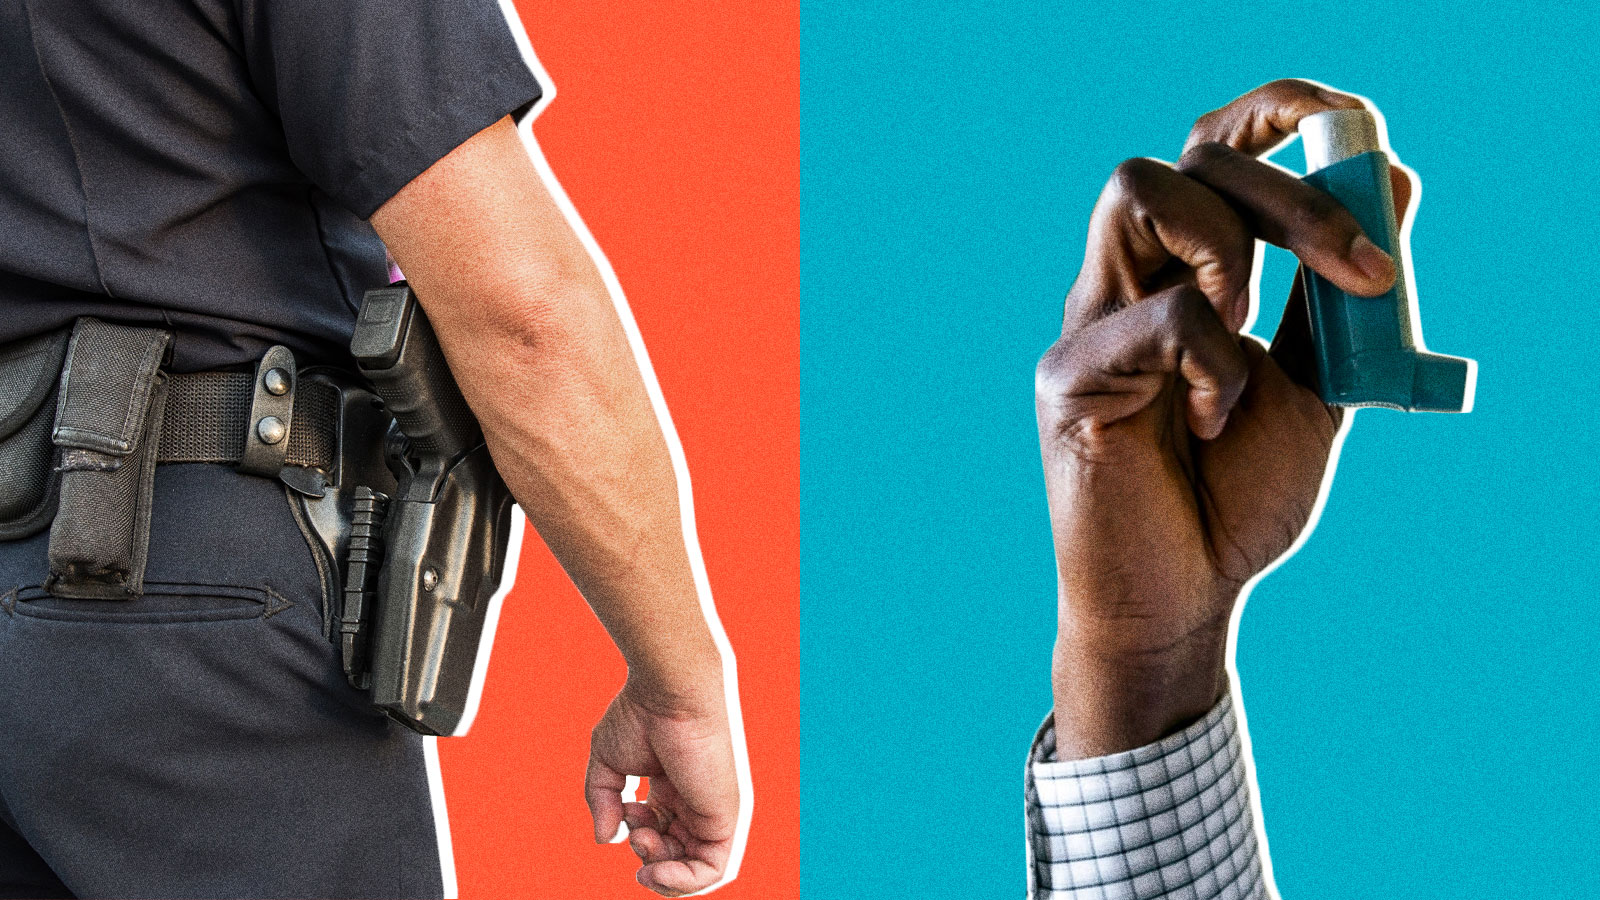 A split screen of a police officer from behind and a black man's hand holding an asthma inhaler